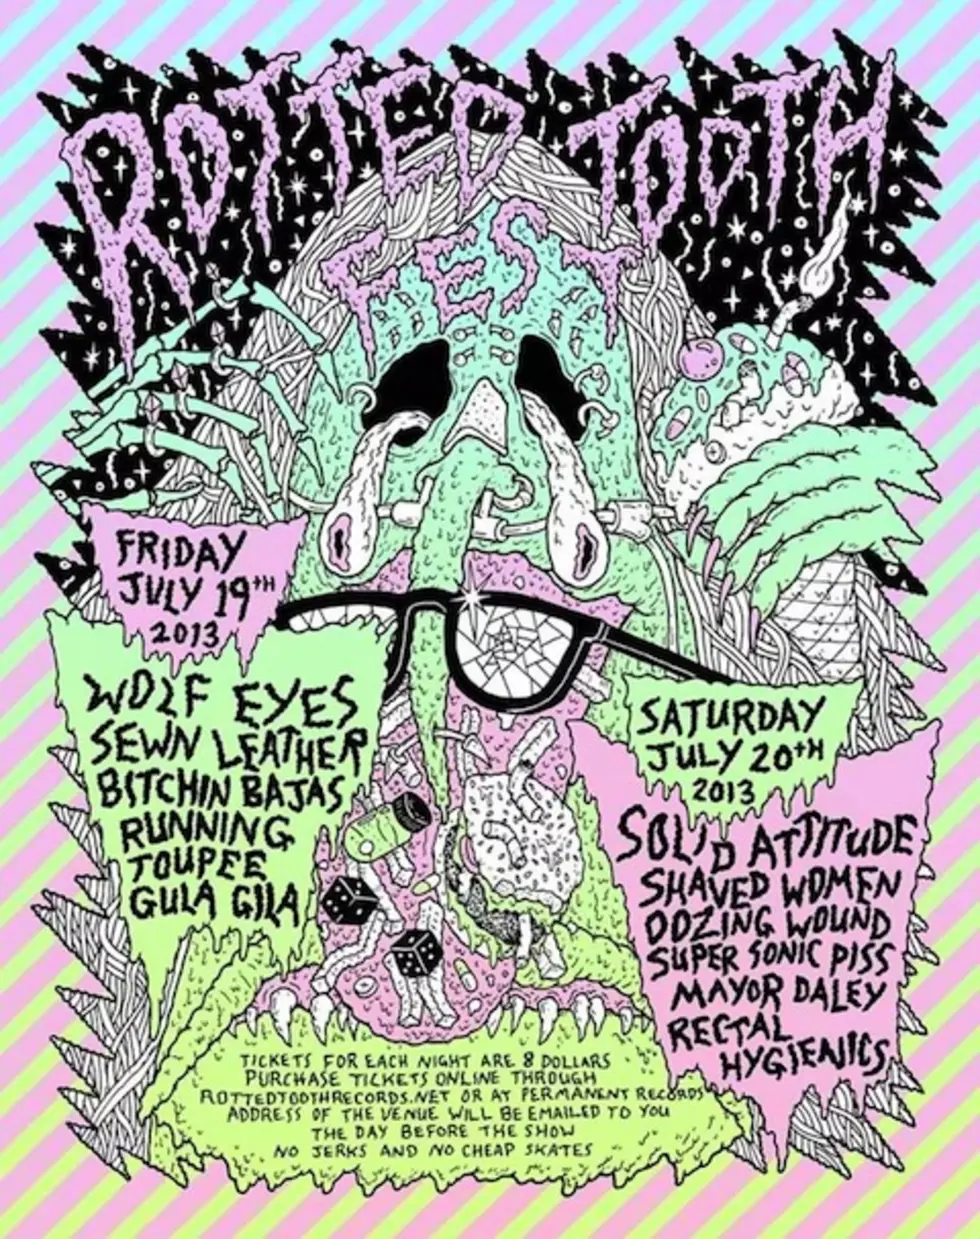 DIY festival Rotted Tooth takes place next weekend (Wolf Eyes, Bitchin Bajas, Oozing Wound, Running, Mayor Daley &#038; more)